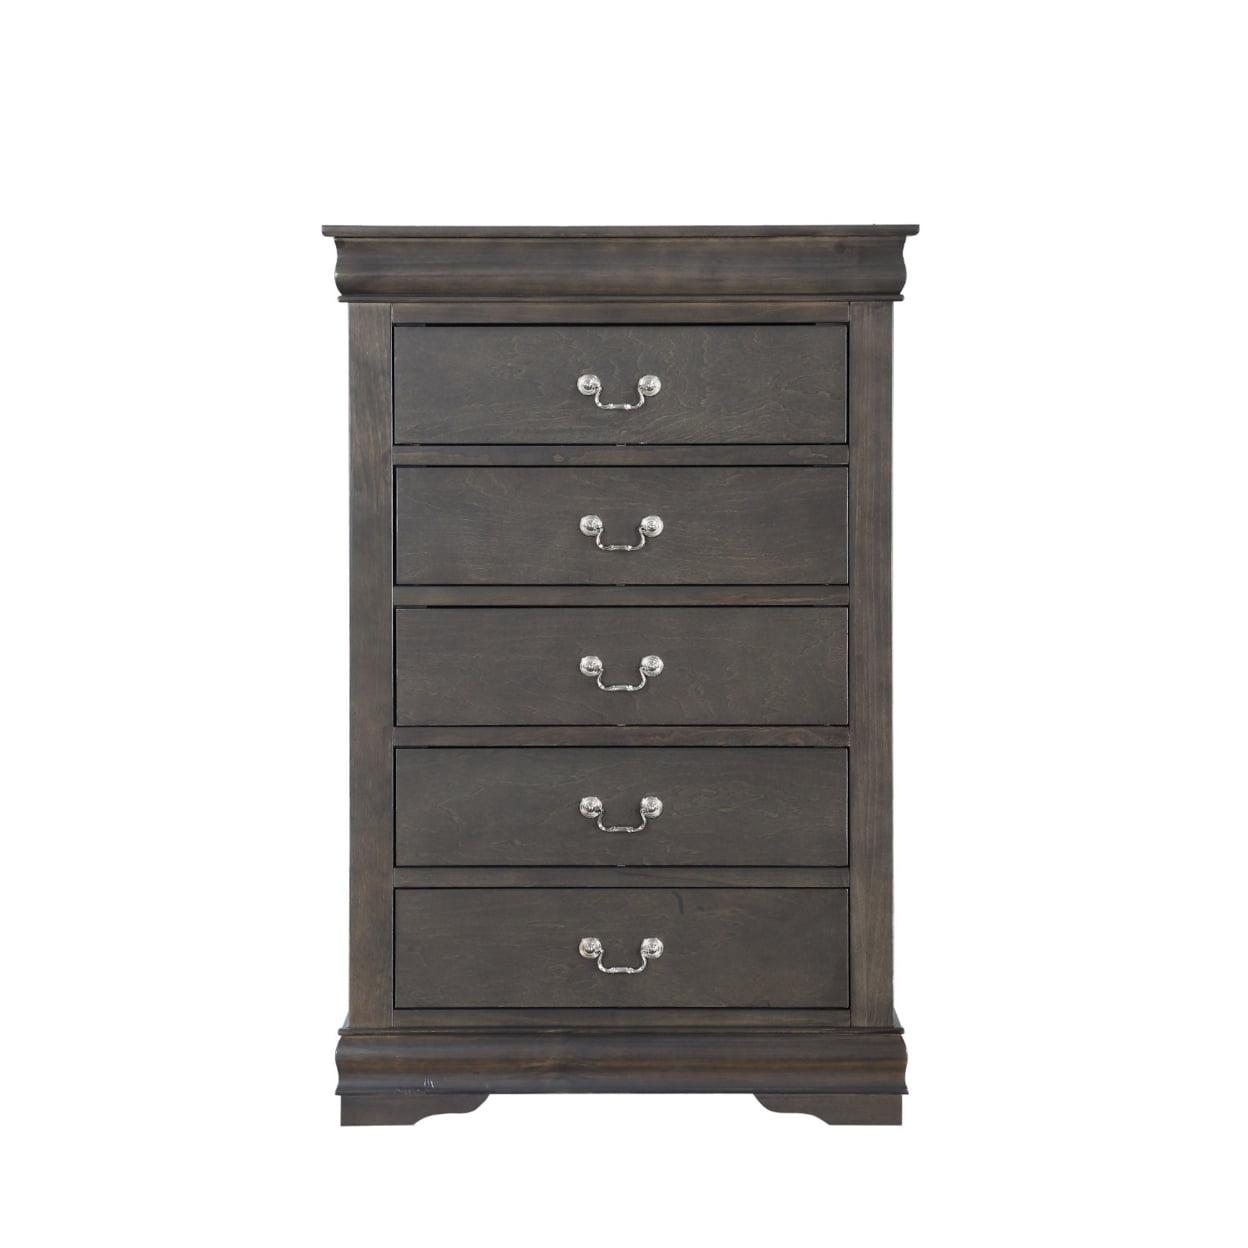 Elegant Gray Wooden Chest with Five Dovetail Drawers and Nickel Handles